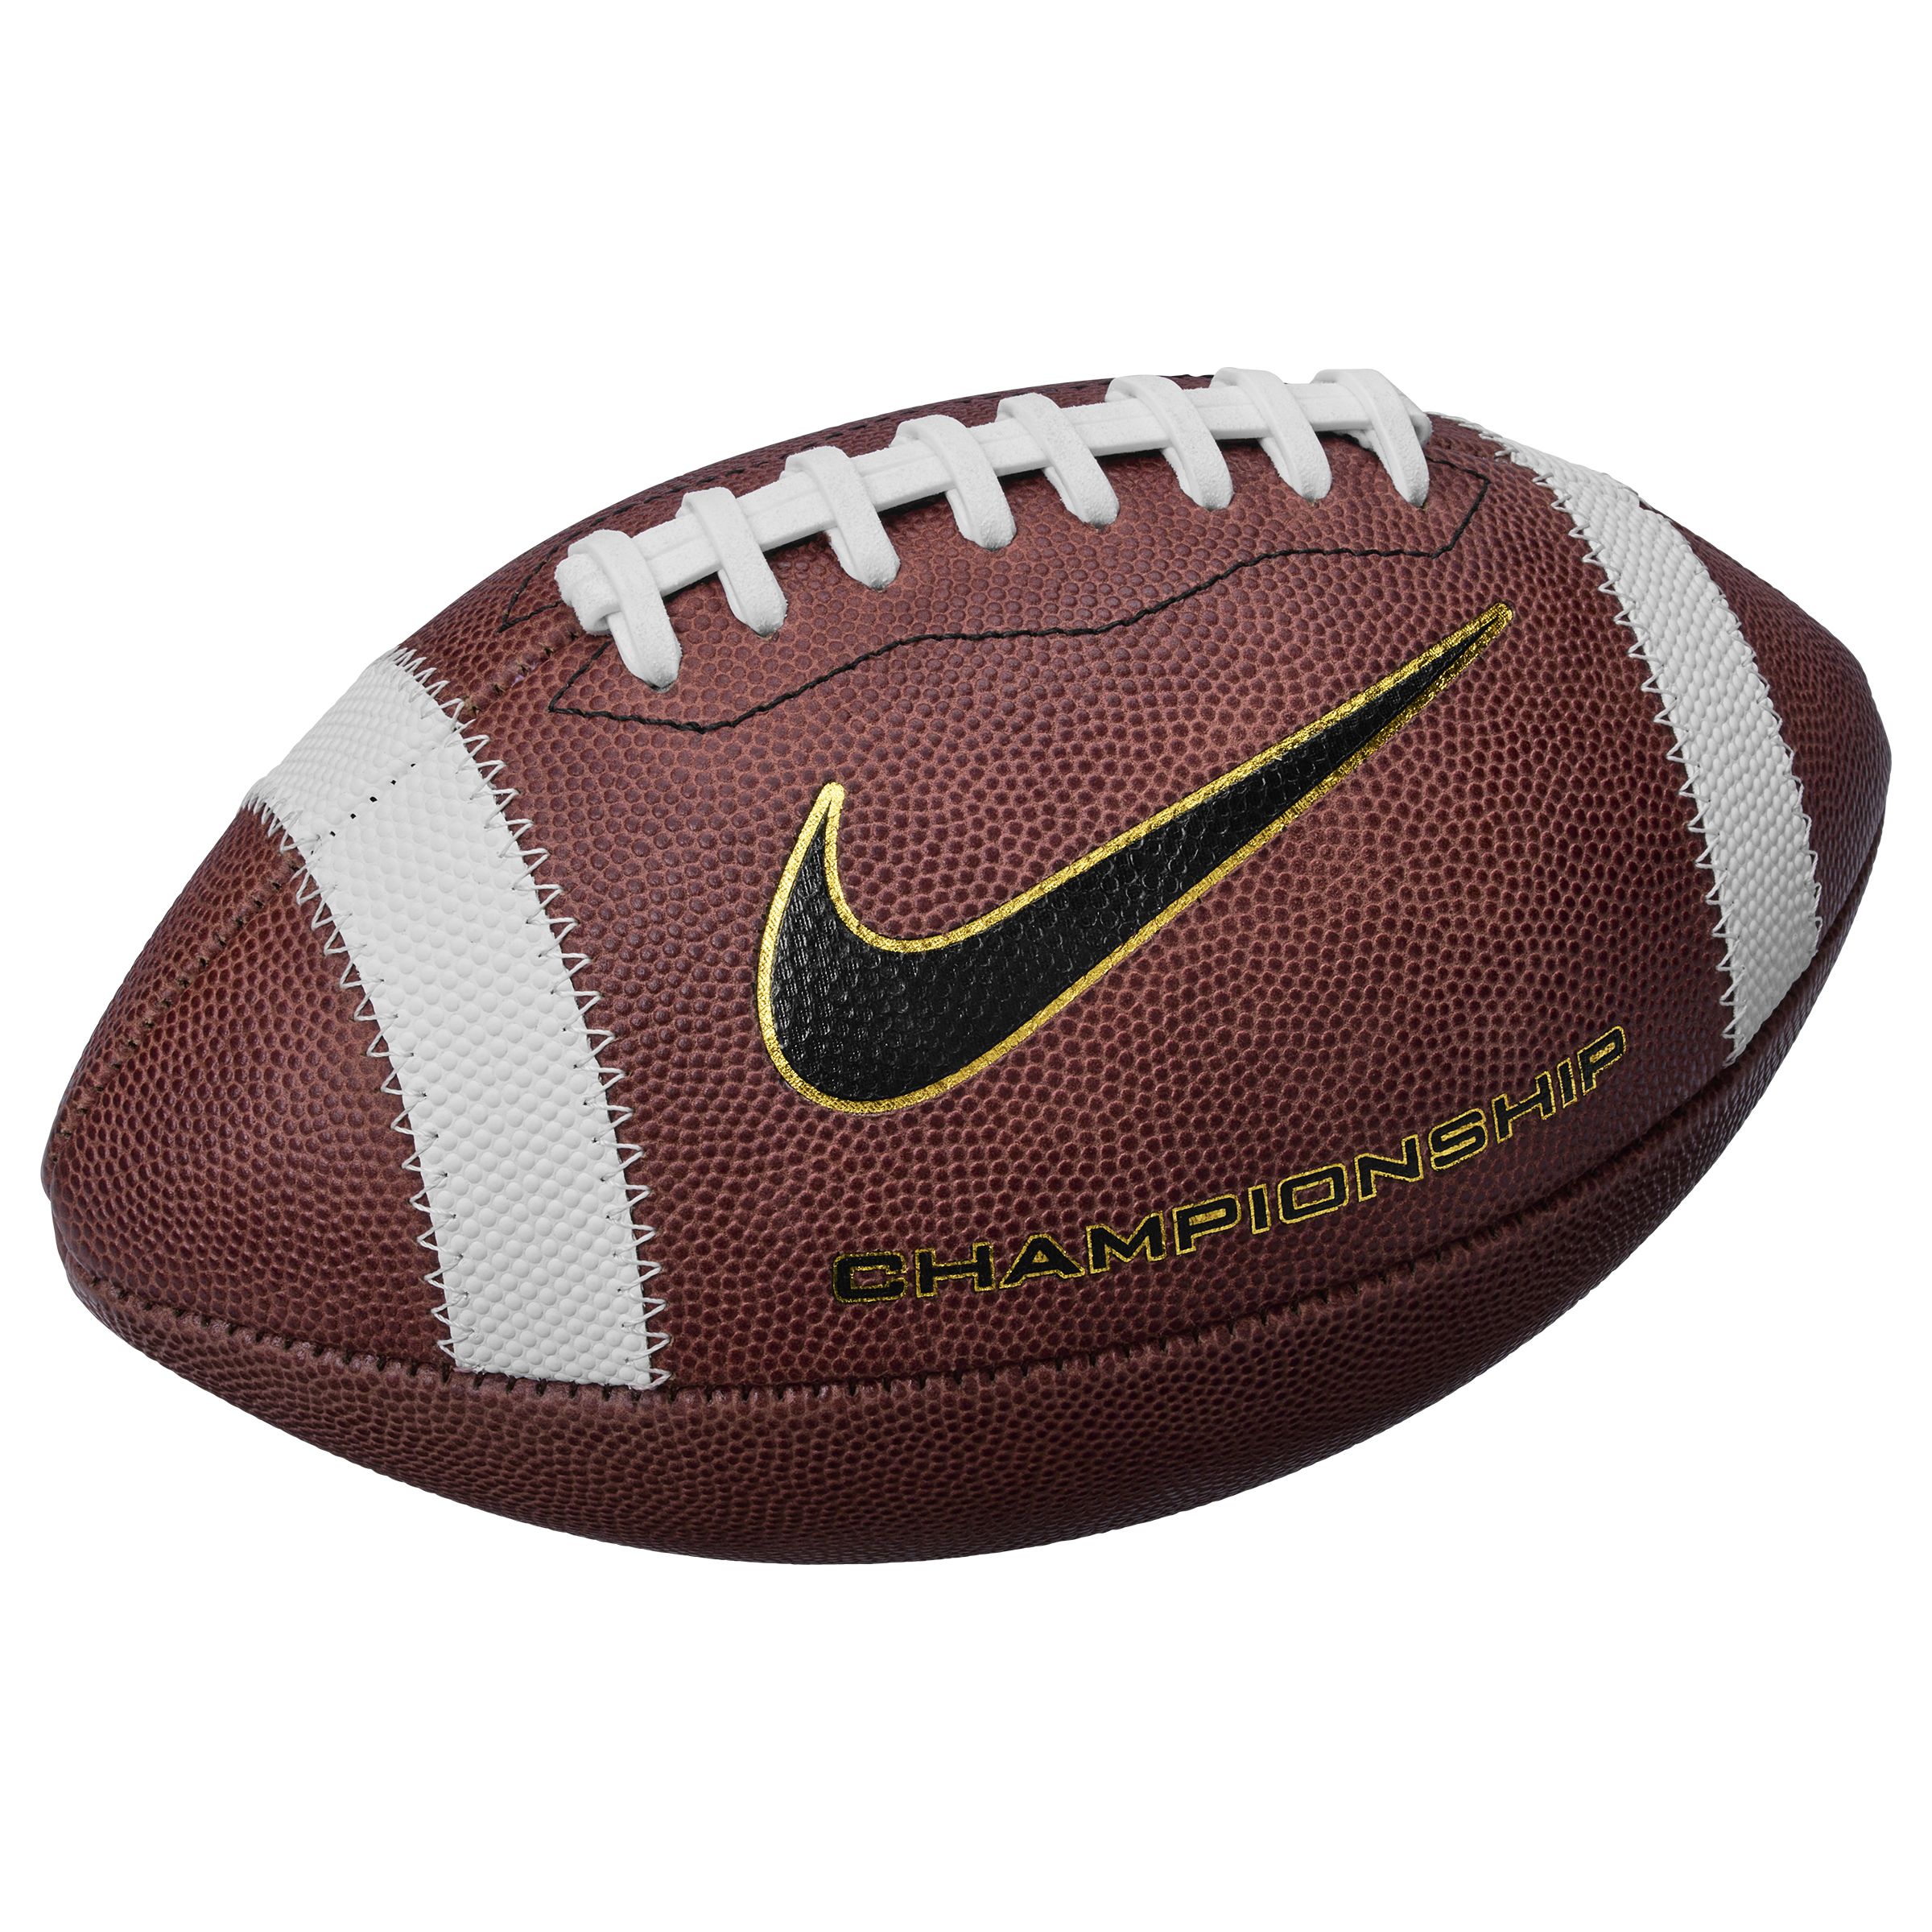 Image of Nike Championship Official Senior Football - Size 9